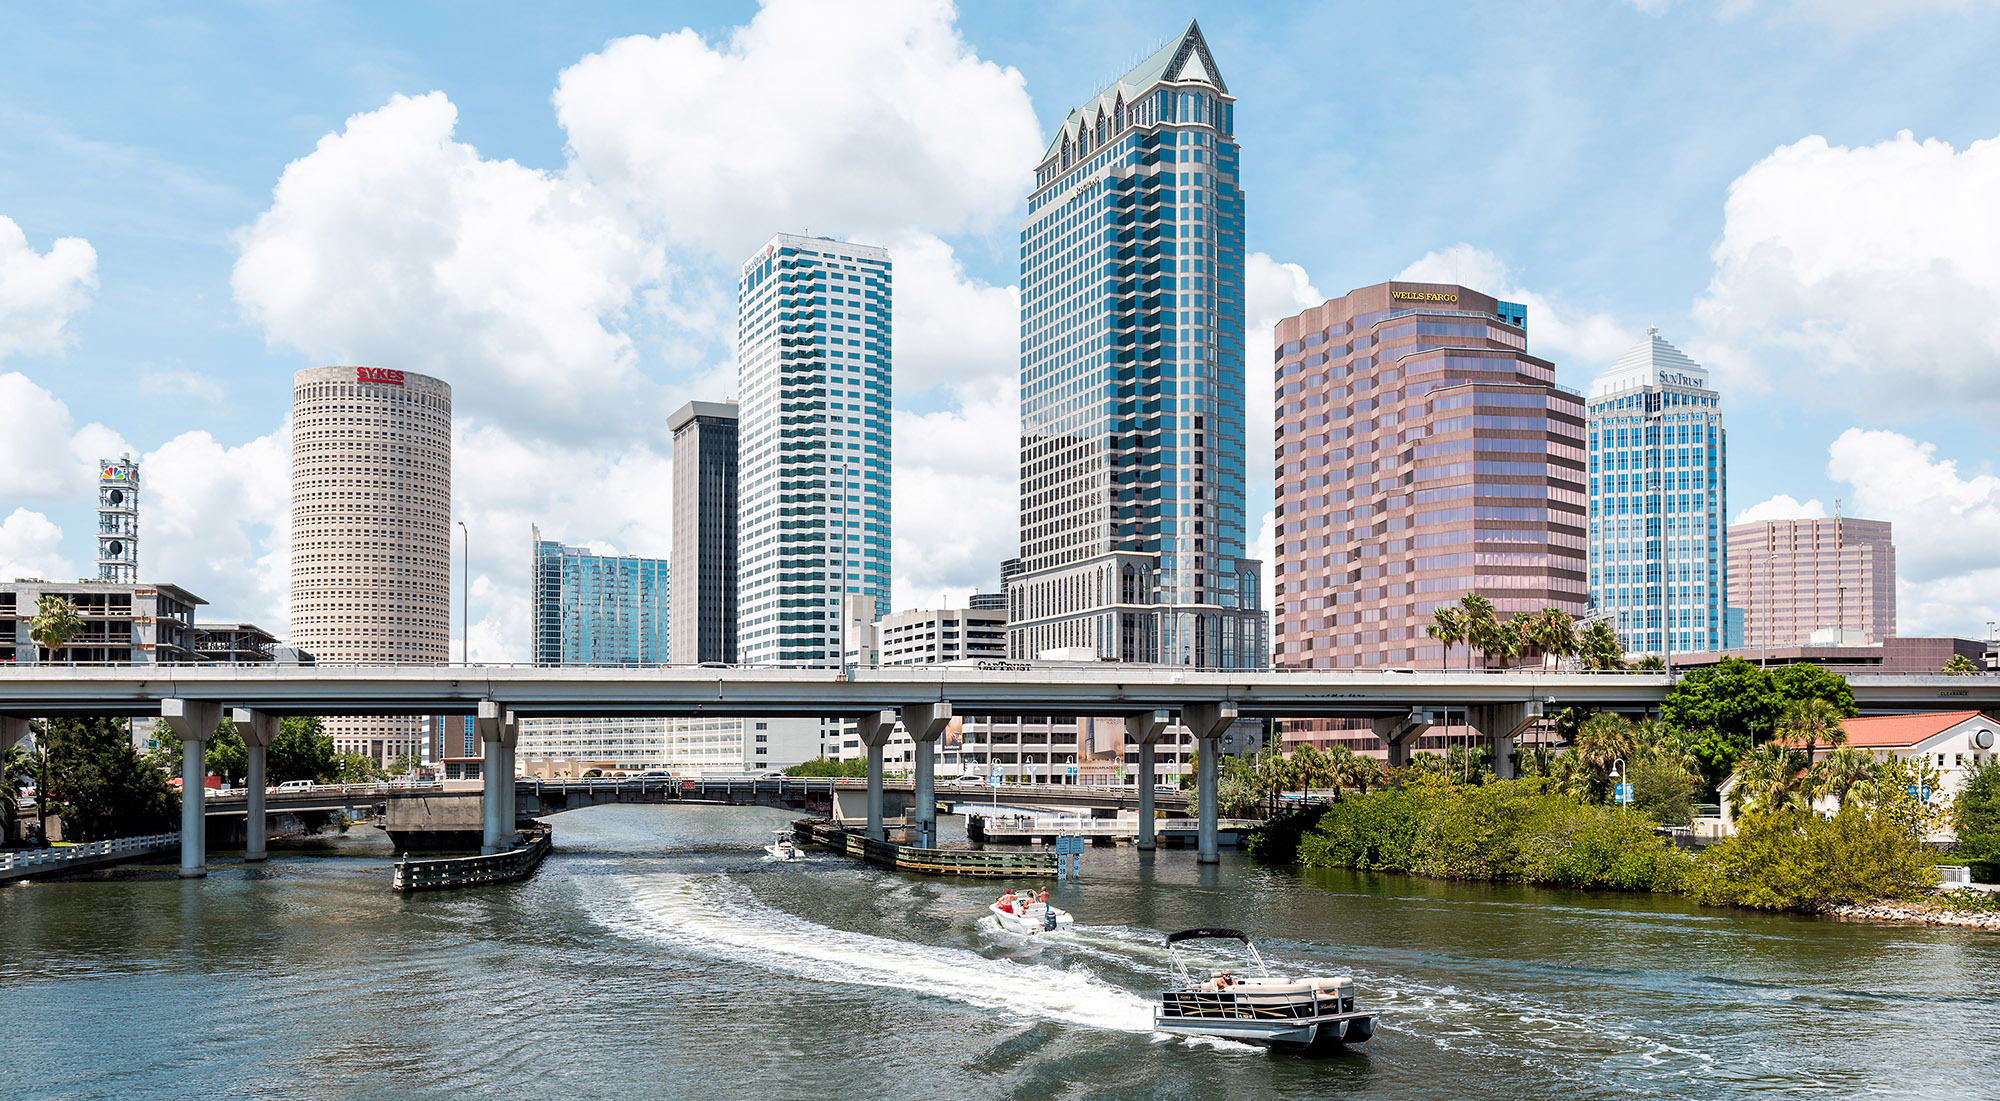 Tampa's skyline is pictured, with a boat in the water in the foreground.